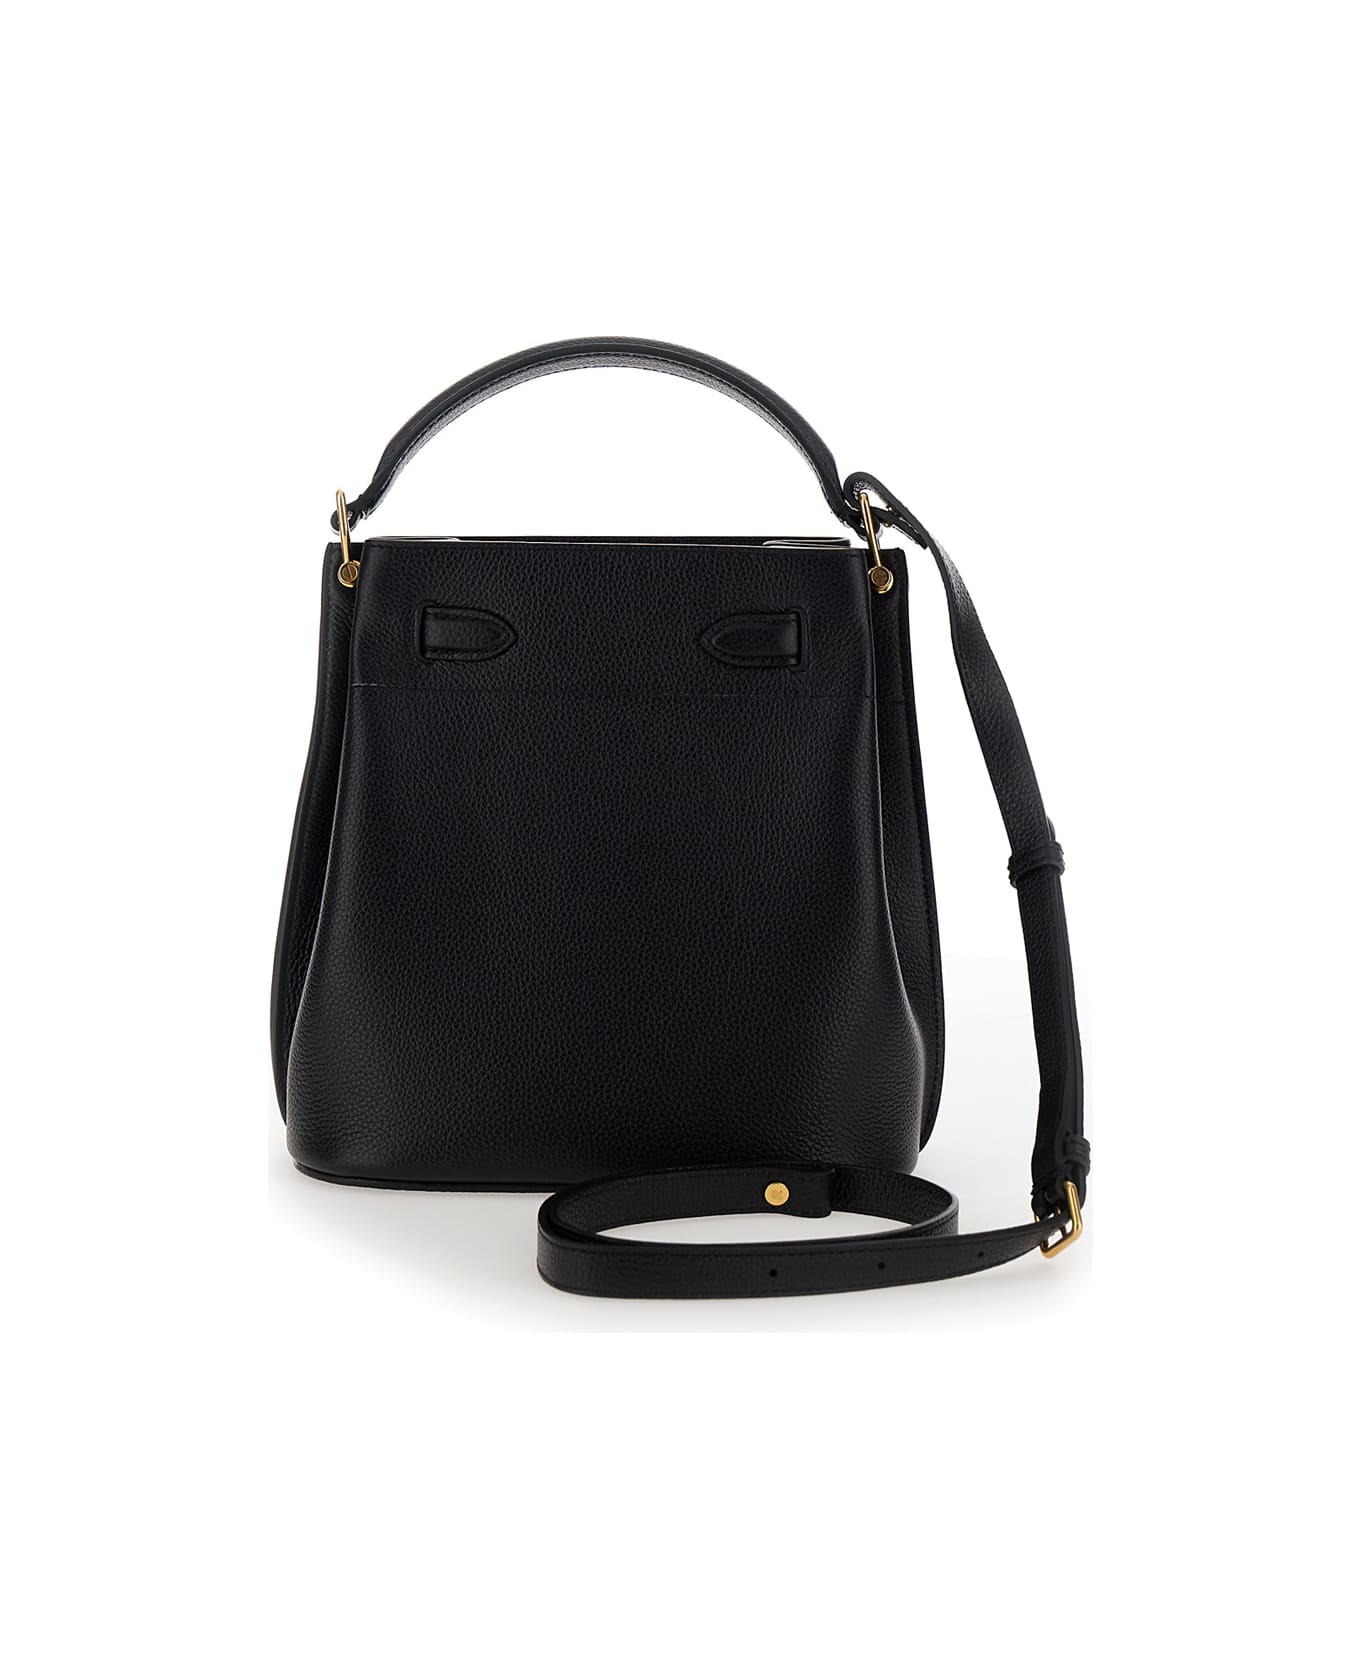 Mulberry 'small Islington' Black Bucket Bag With Twist Lock Closure In Hammered Leather Woman - Black トートバッグ